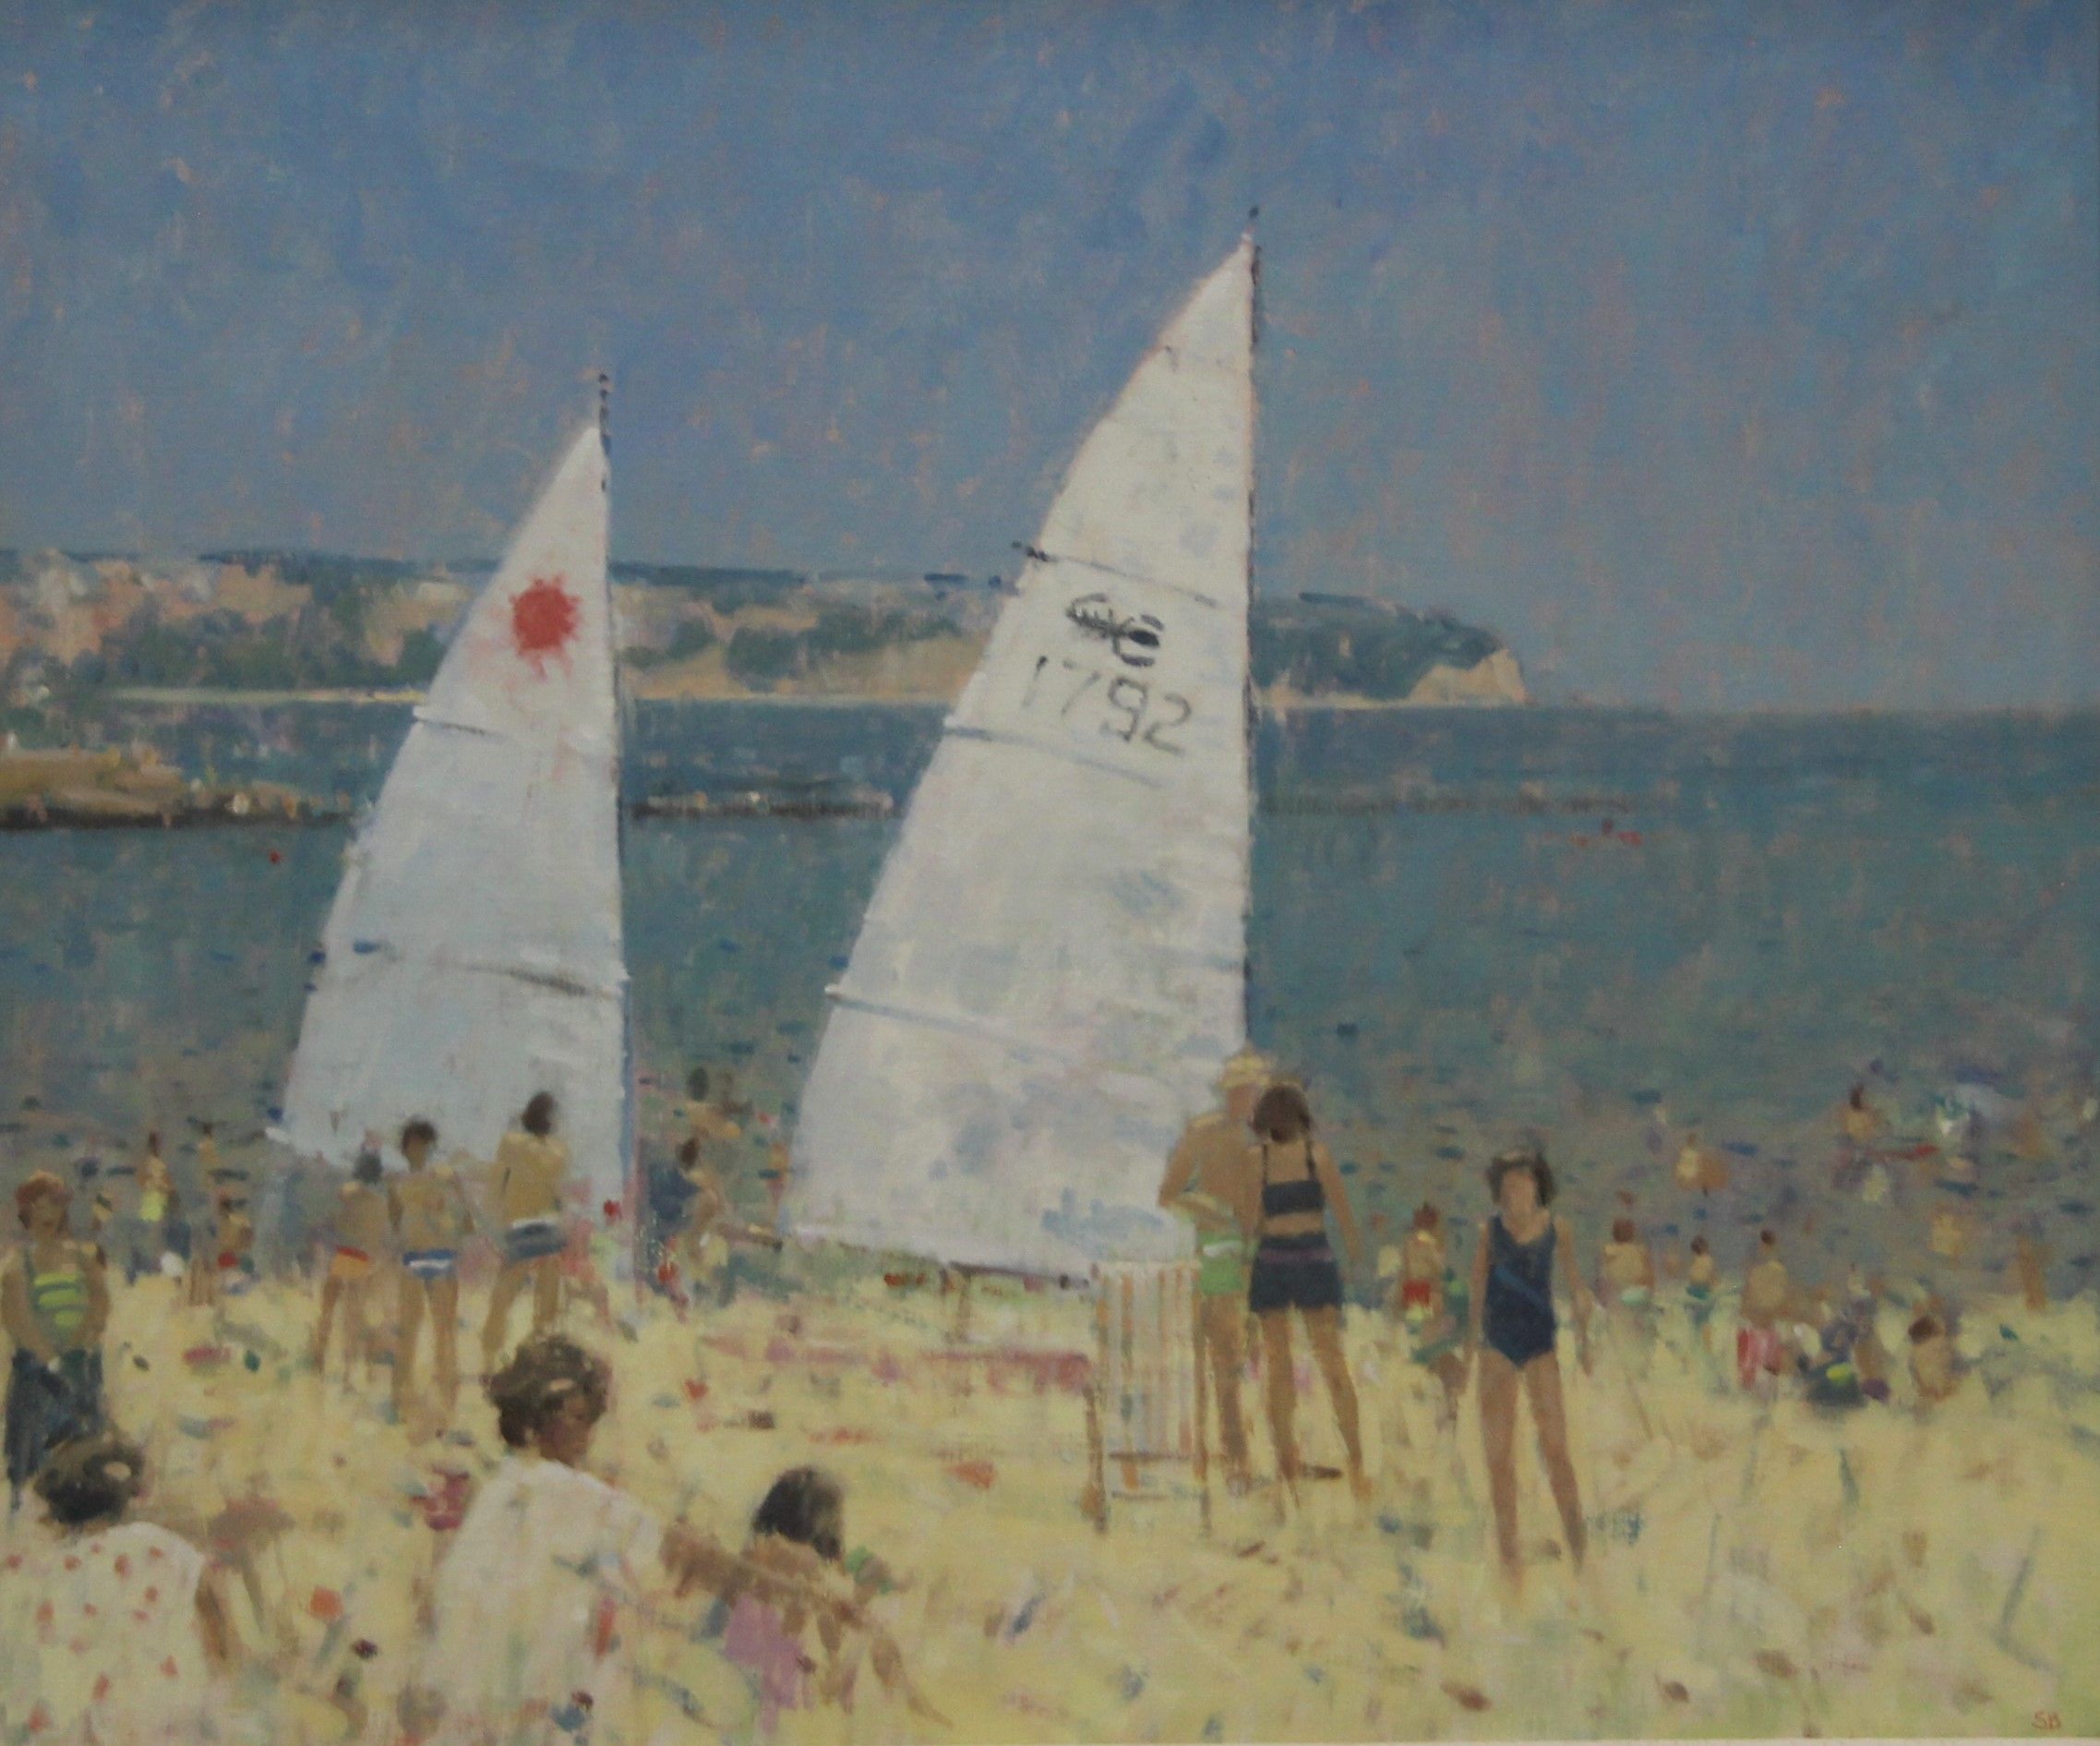 Crowded Beach, signed with initials SB, oil on canvas, framed. 59 x 49 cm.